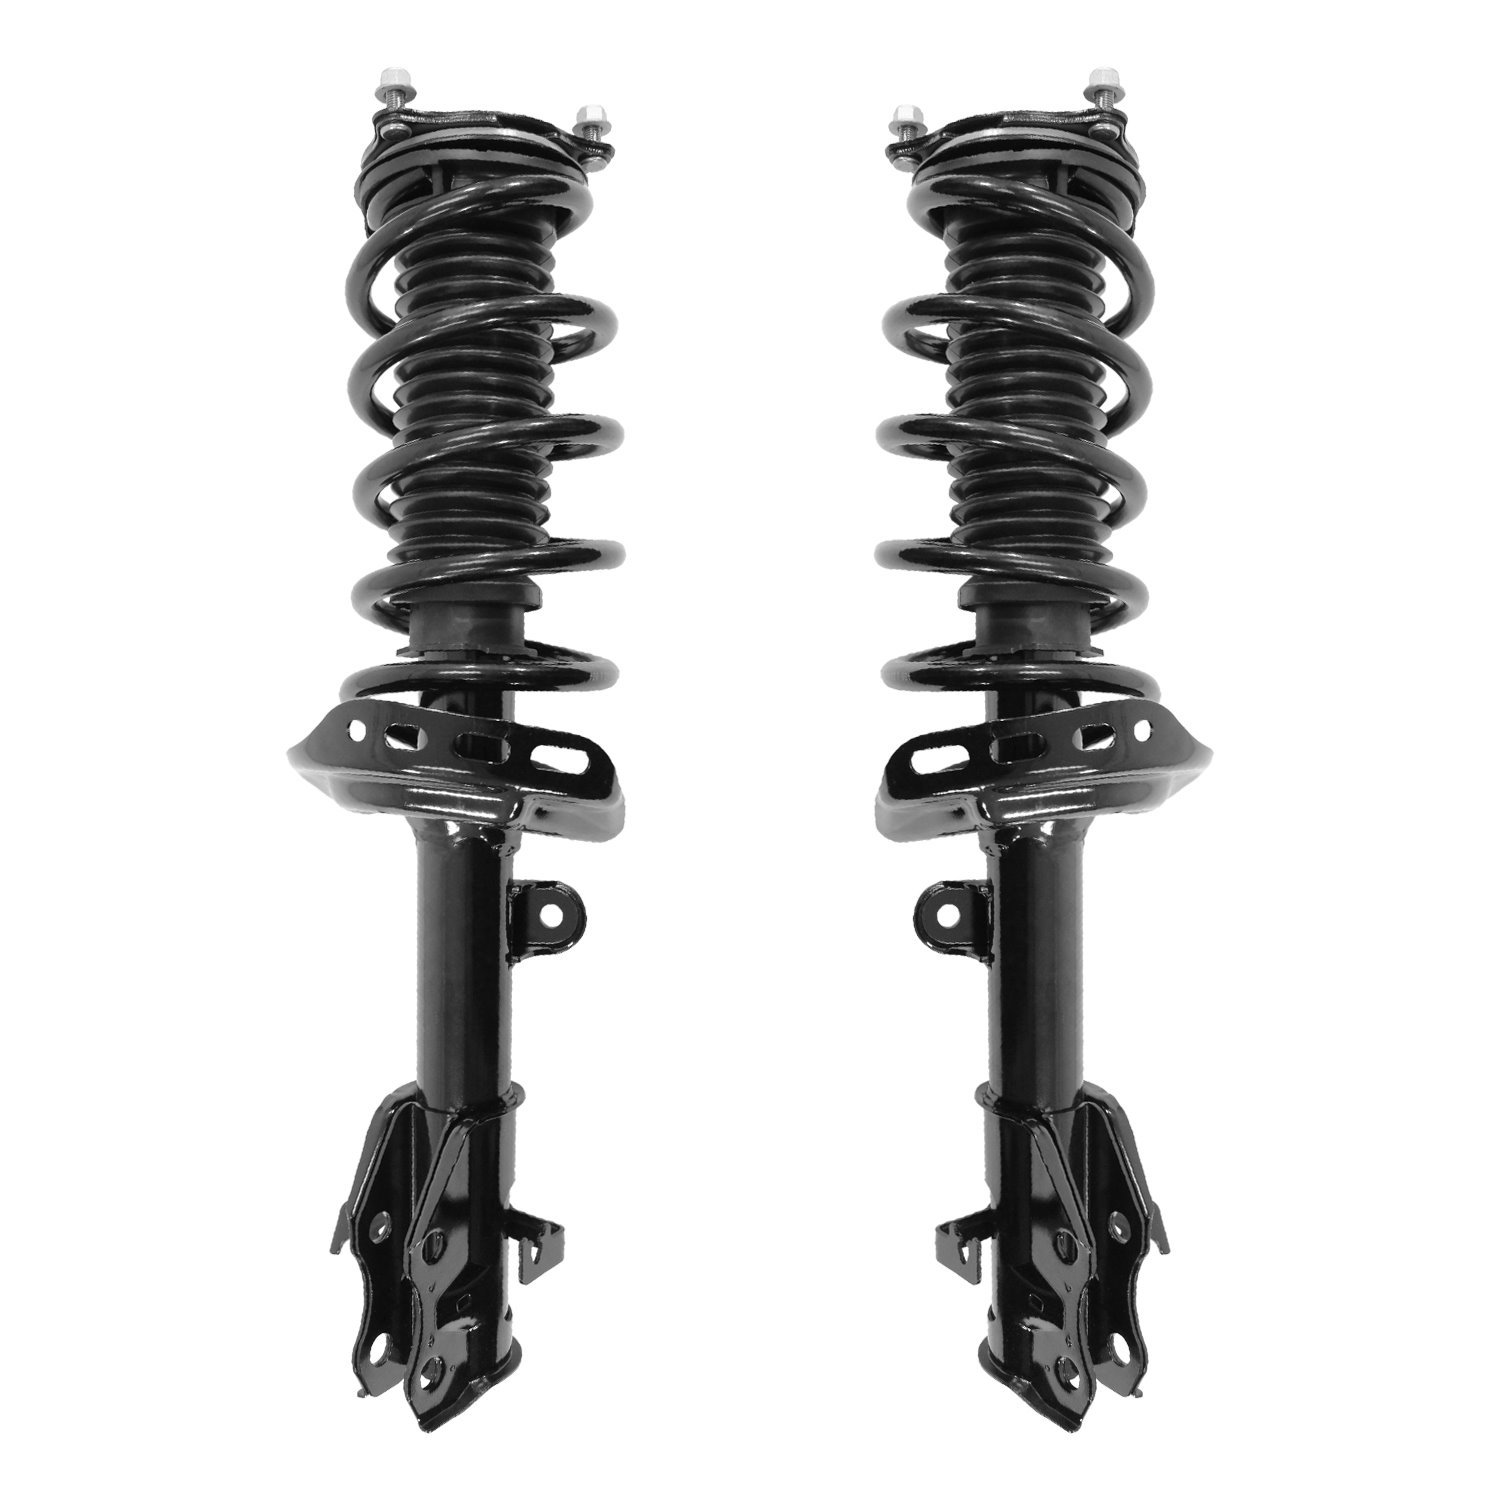 2-13261-13262-001 Suspension Strut & Coil Spring Assembly Set Fits Select Acura RDX